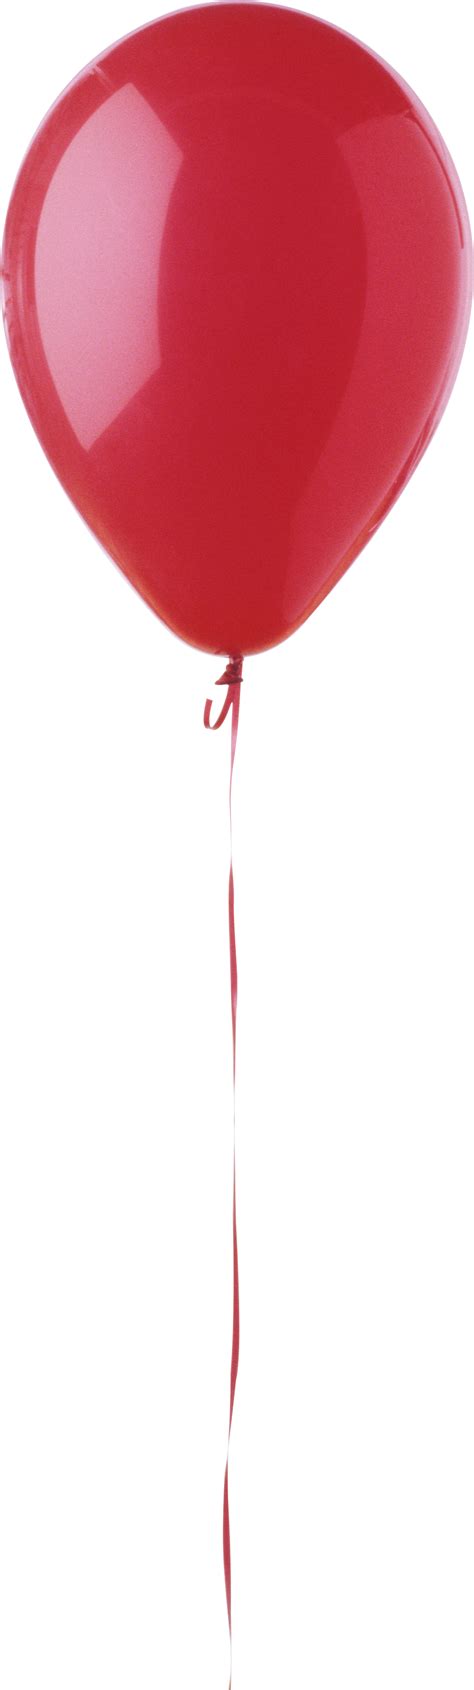 One Balloon Png Transparent One Balloonpng Images Pluspng